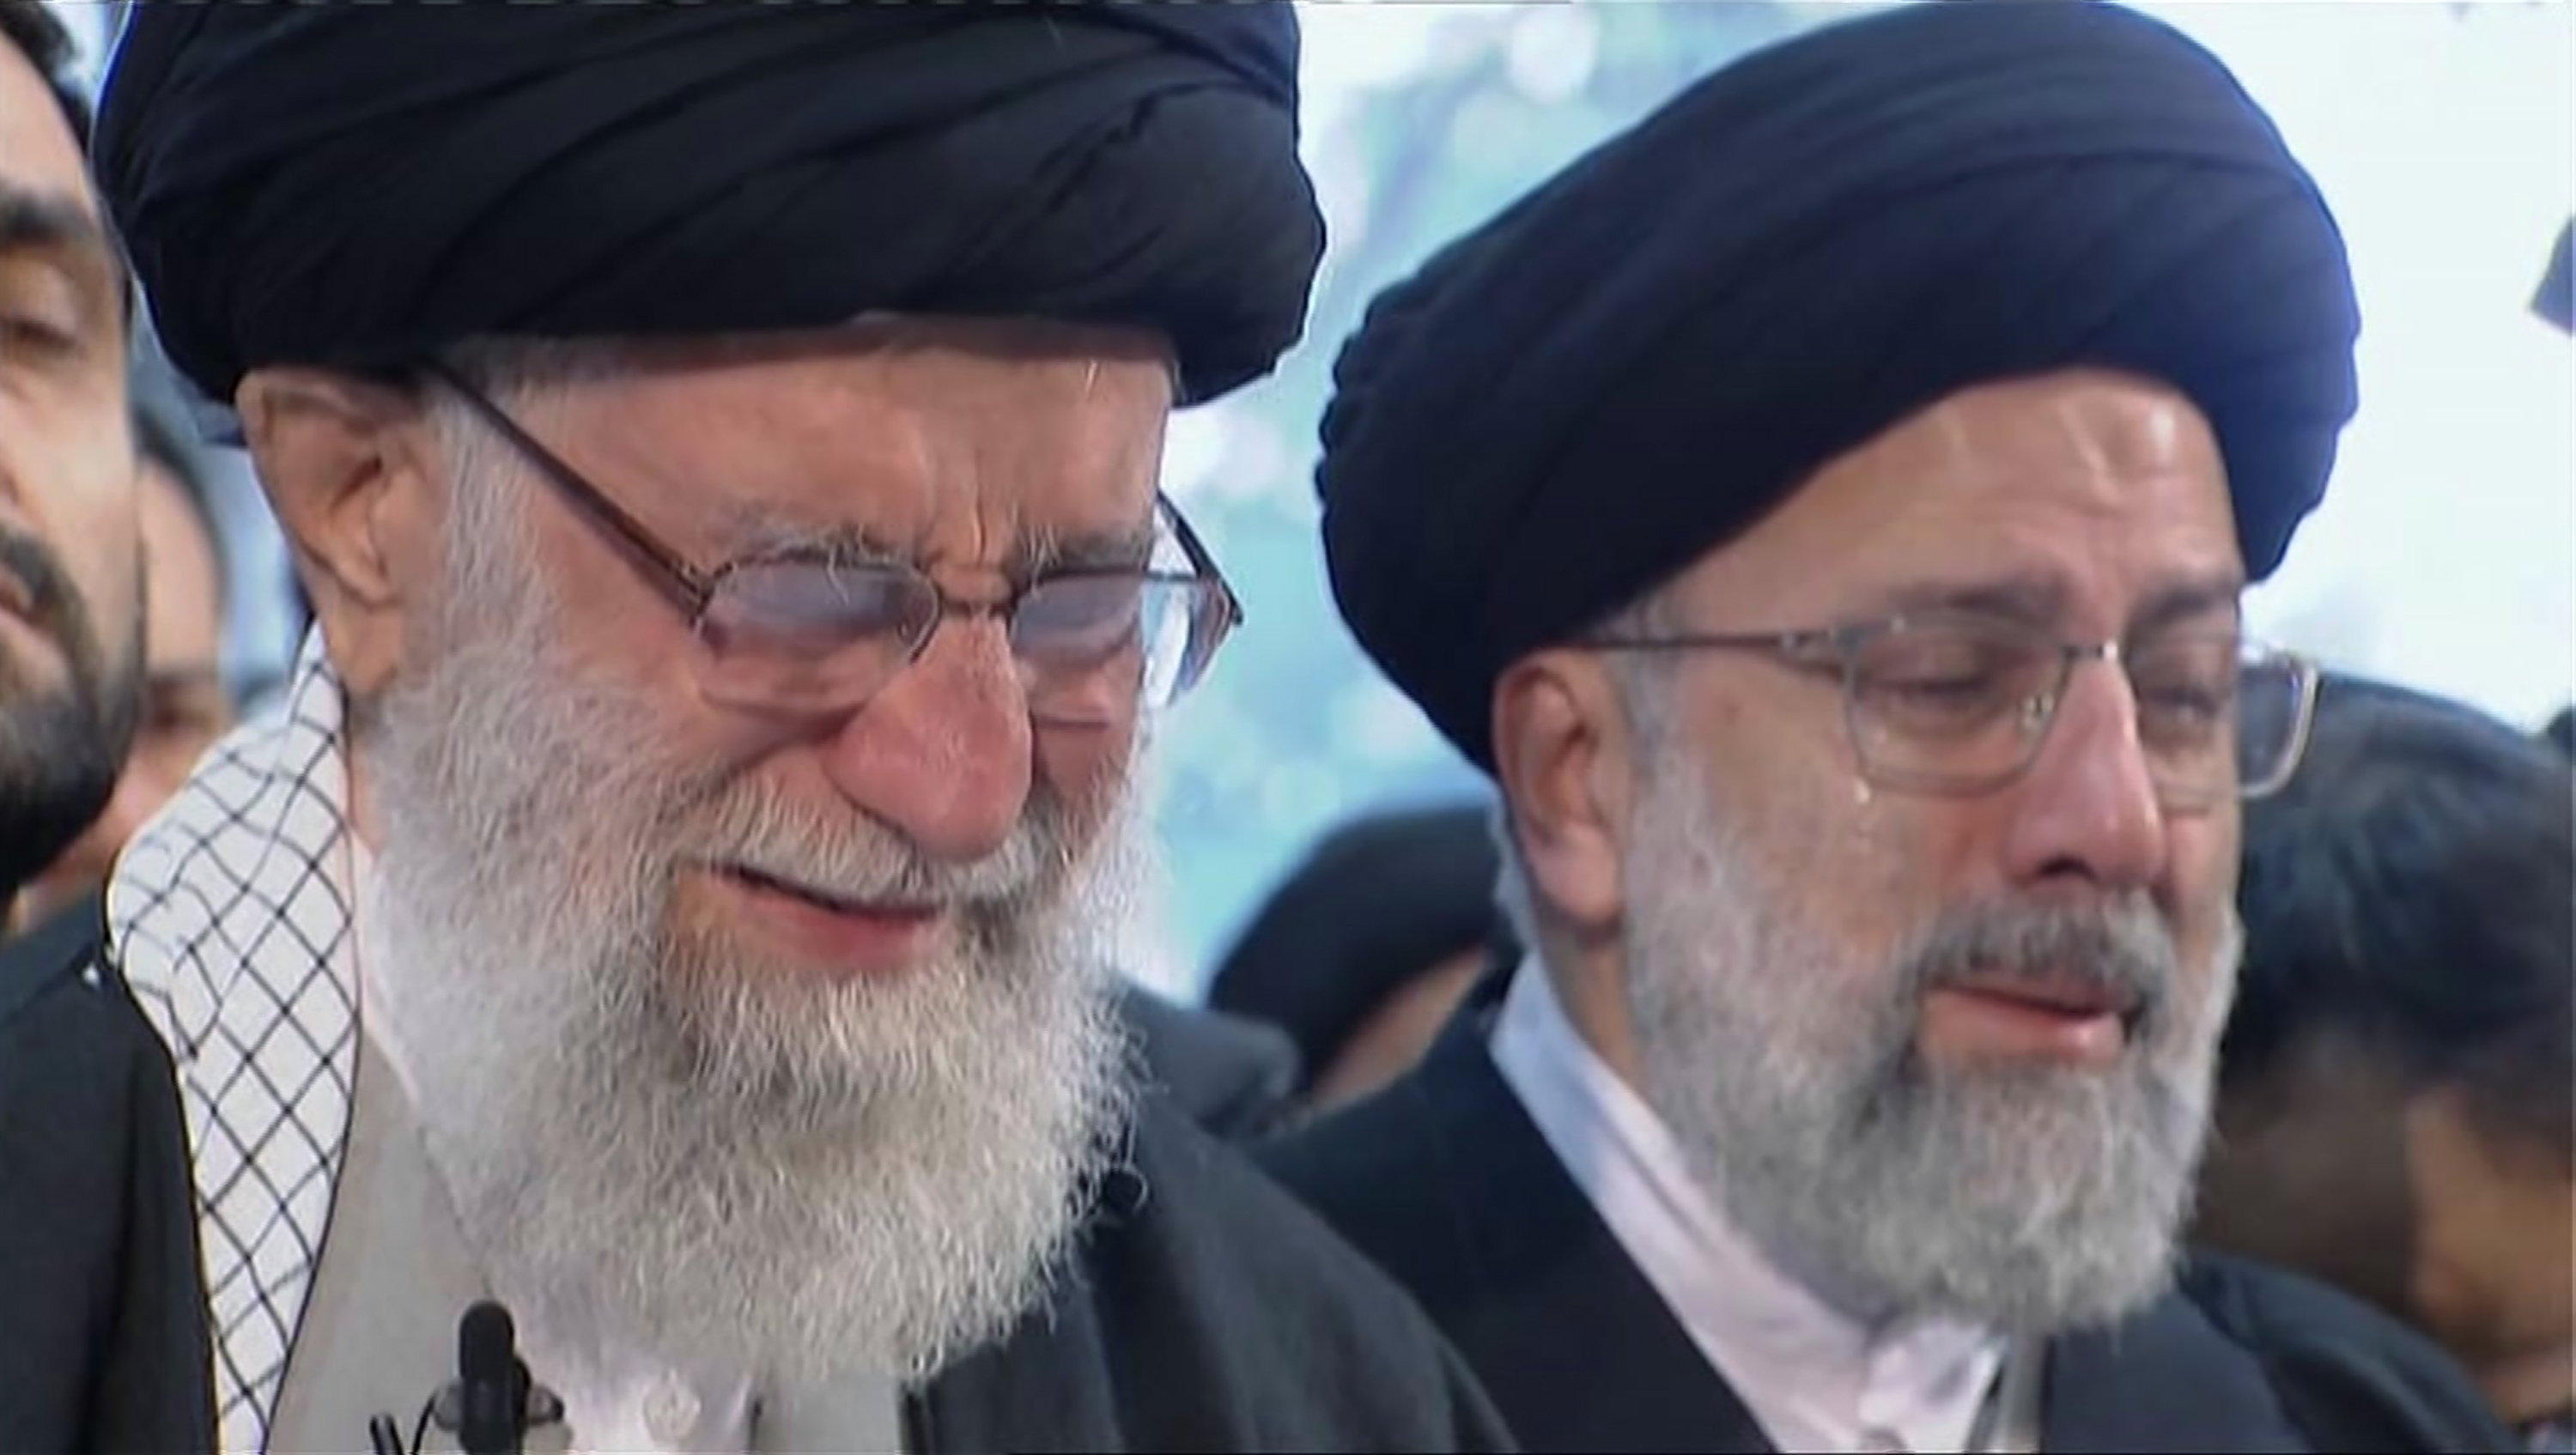 In this image taken from video, Iranian Supreme Leader Ayatollah Ali Khamenei, left, openly weeps as he leads a prayer over the coffin of Gen. Qassem Soleimani, who was killed in Iraq in a U.S. drone strike on Friday, at the Tehran University campus, in Tehran, Iran, Monday, Jan. 6, 2020. (Iran Press TV via AP)